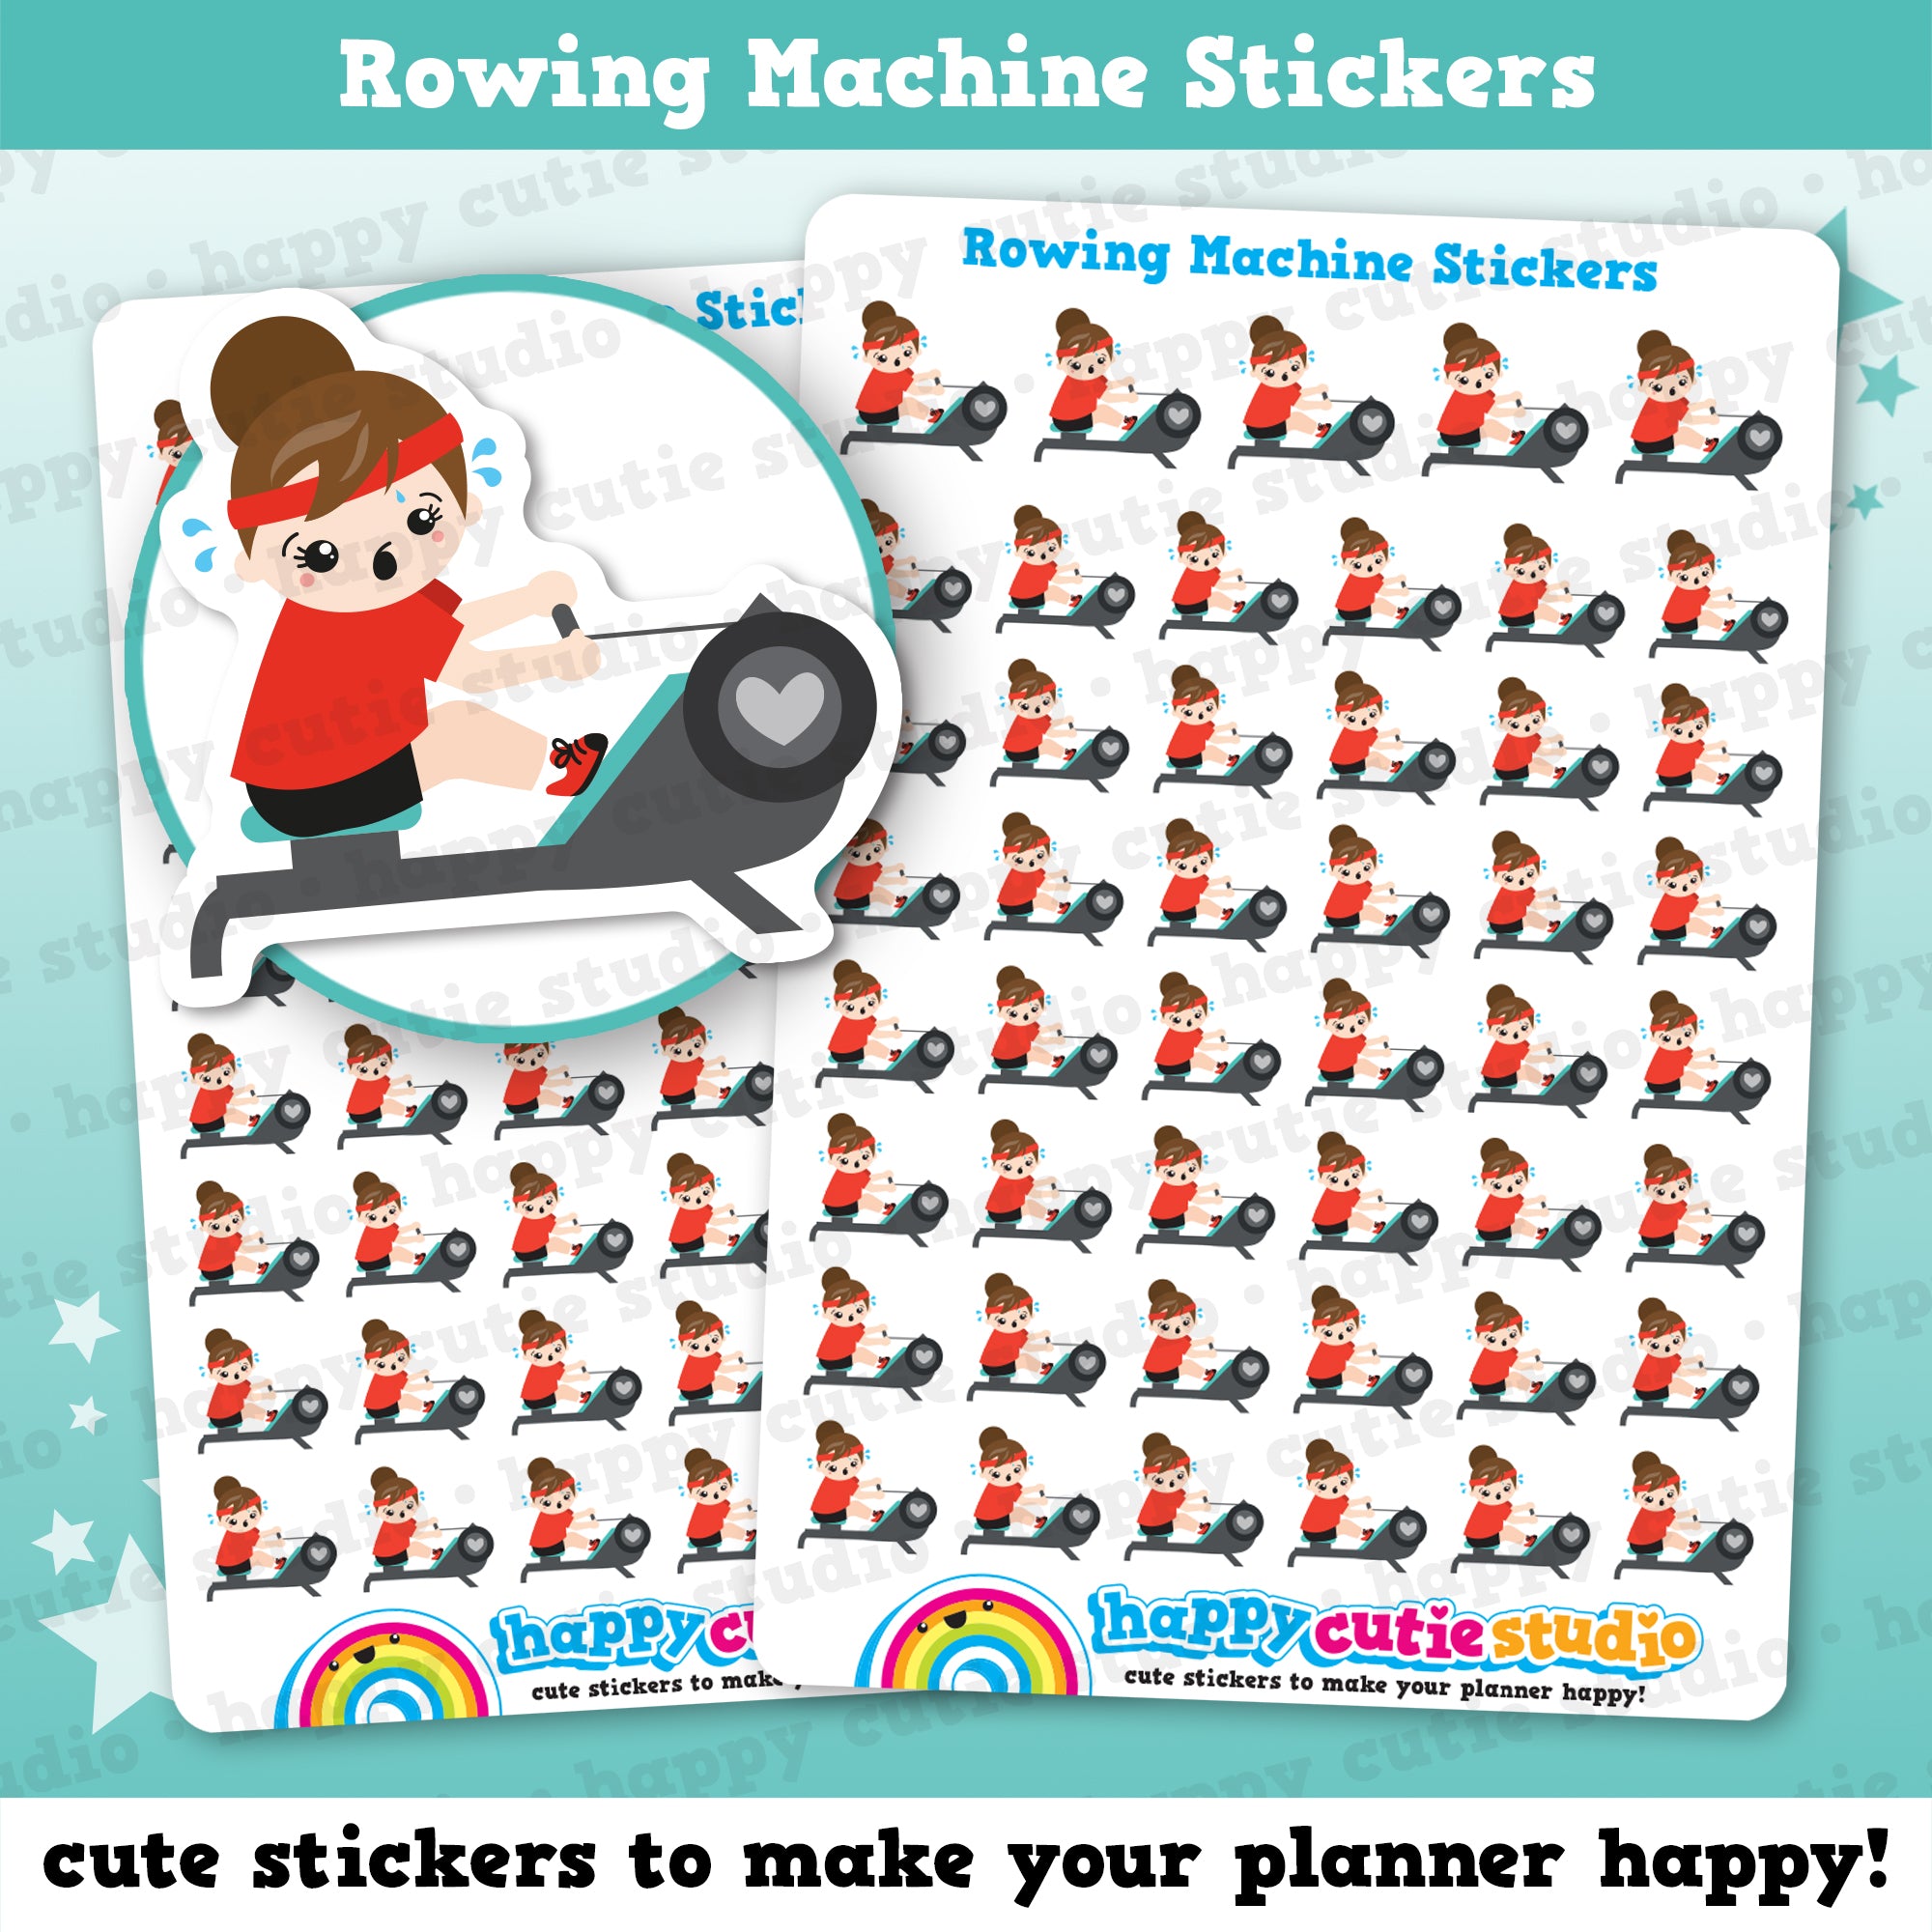 47 Cute Rowing/Machine/Exercise Girl Planner Stickers